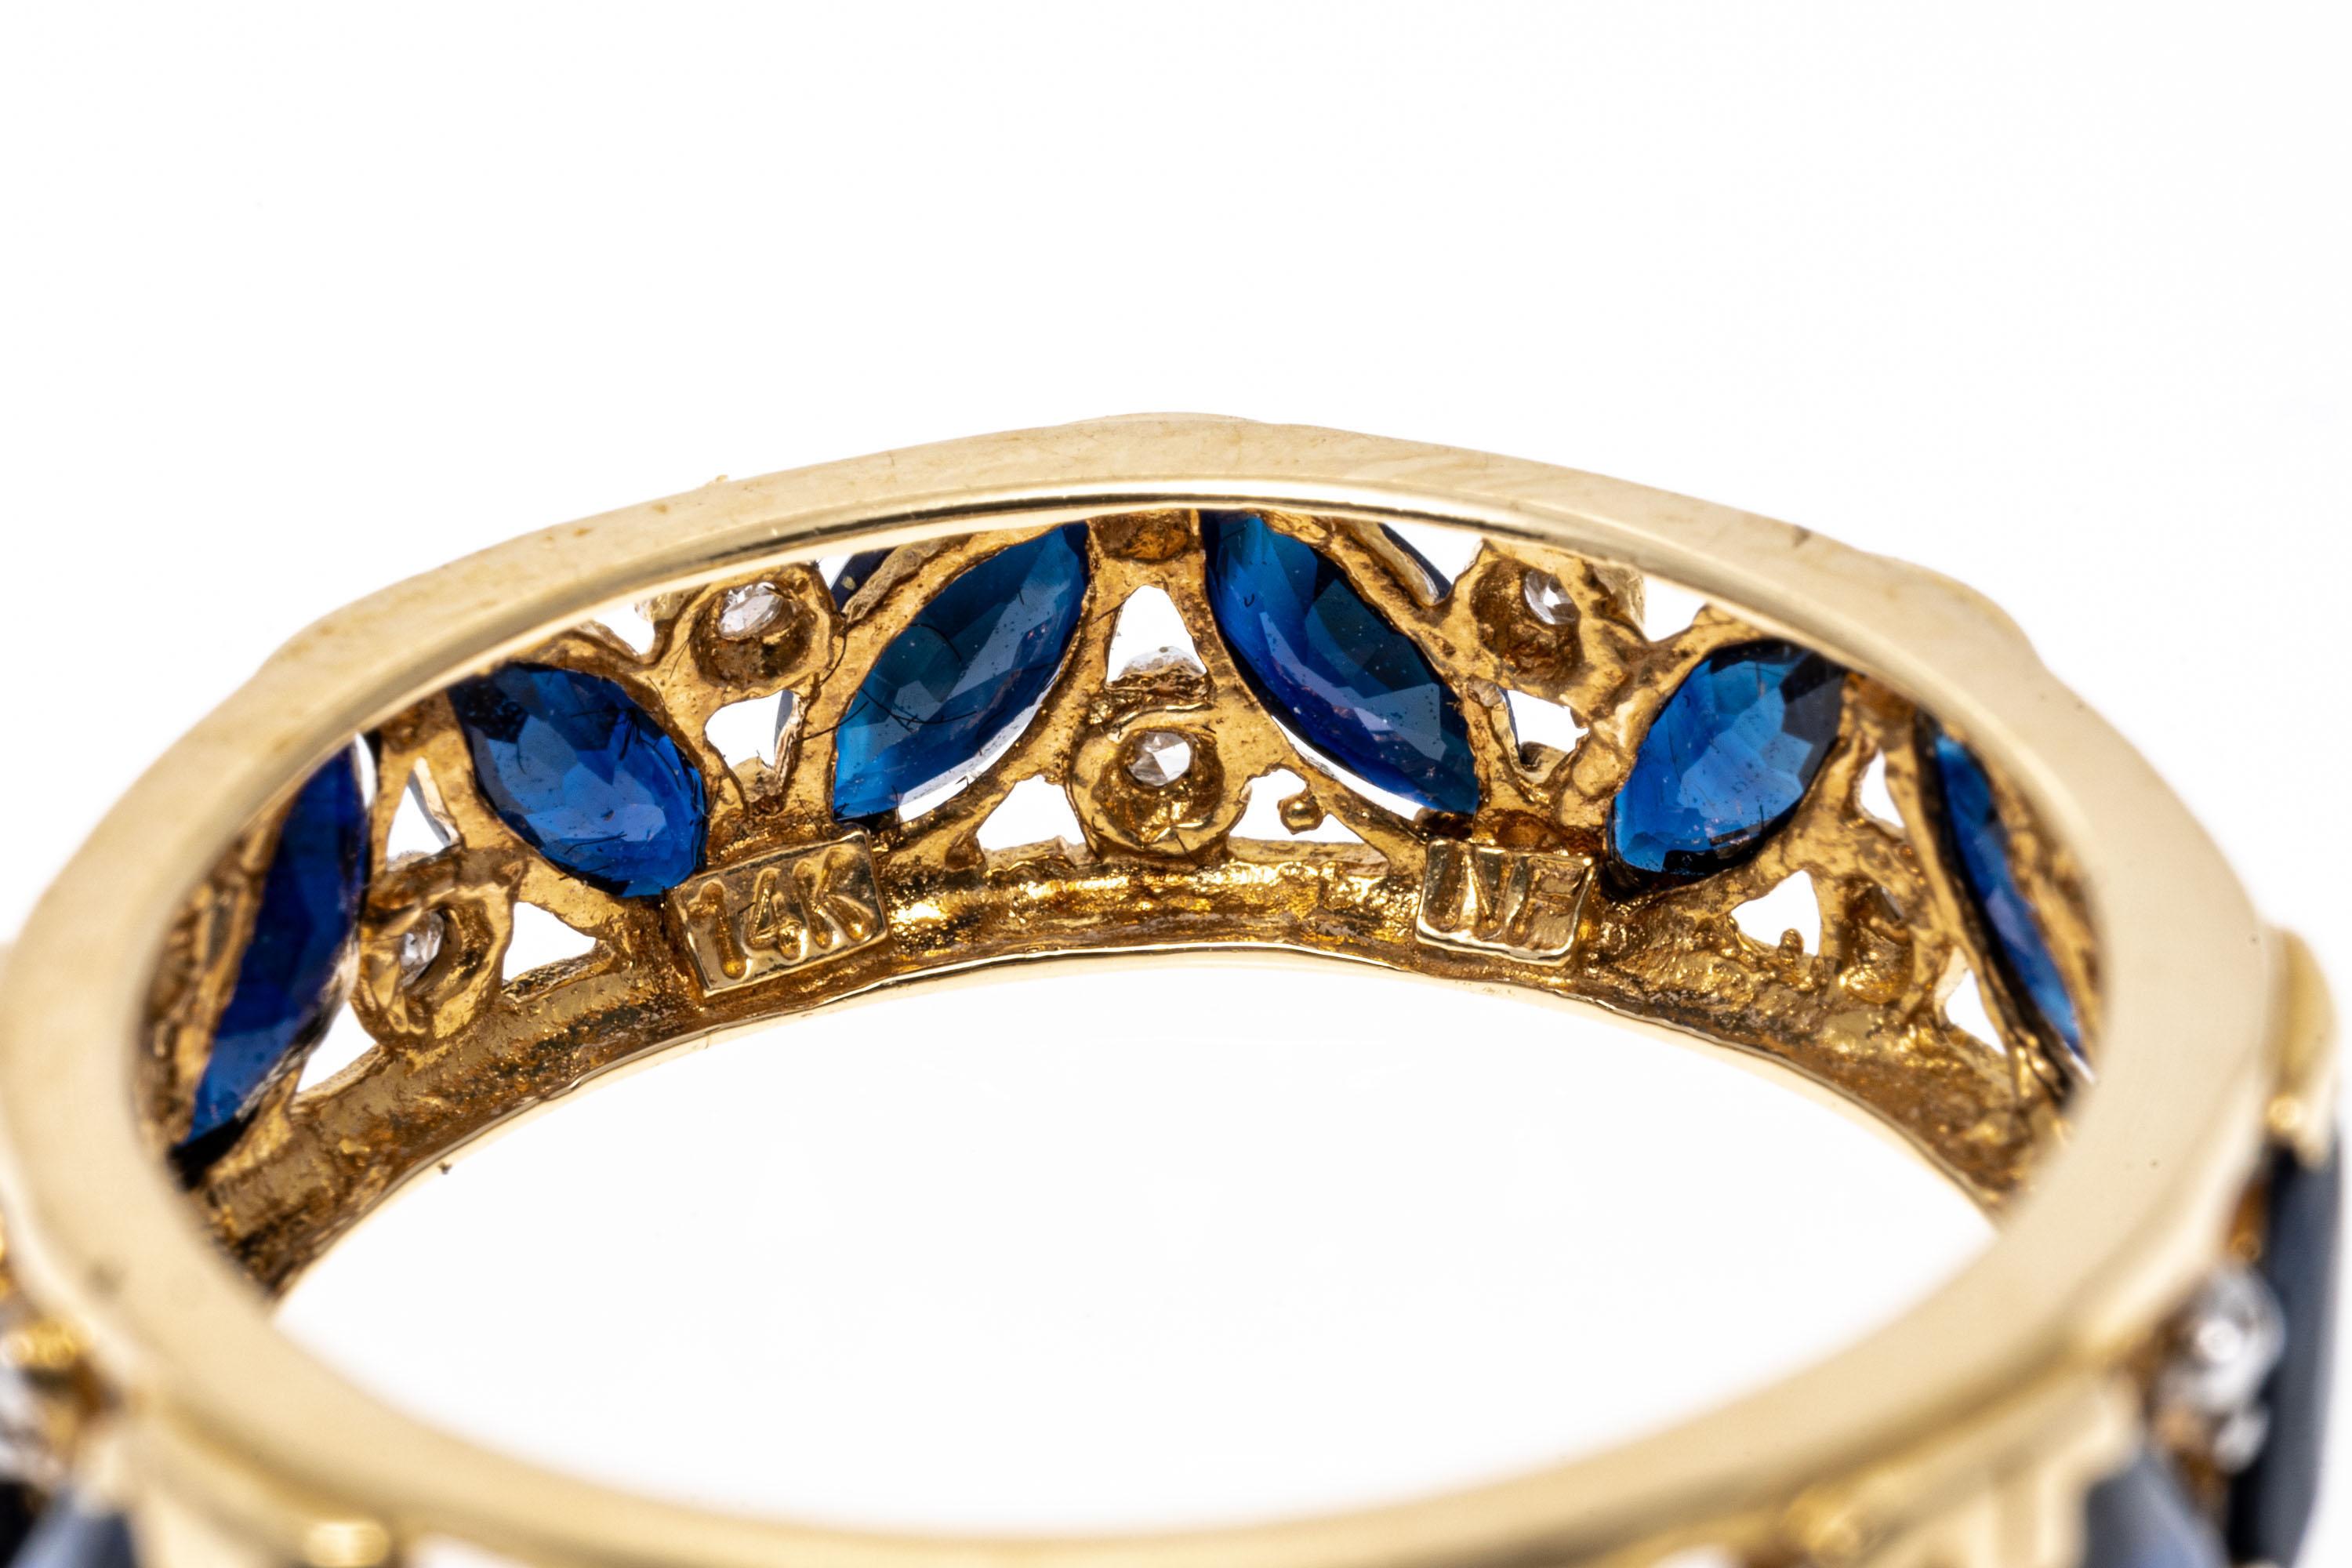 14k yellow gold ring. This striking eternity band ring has tilted marquise faceted, dark blue color sapphires, approximately 1.44 TCW, prong set in an alternating pattern and decorated with round faceted accent diamonds, approximately 0.04